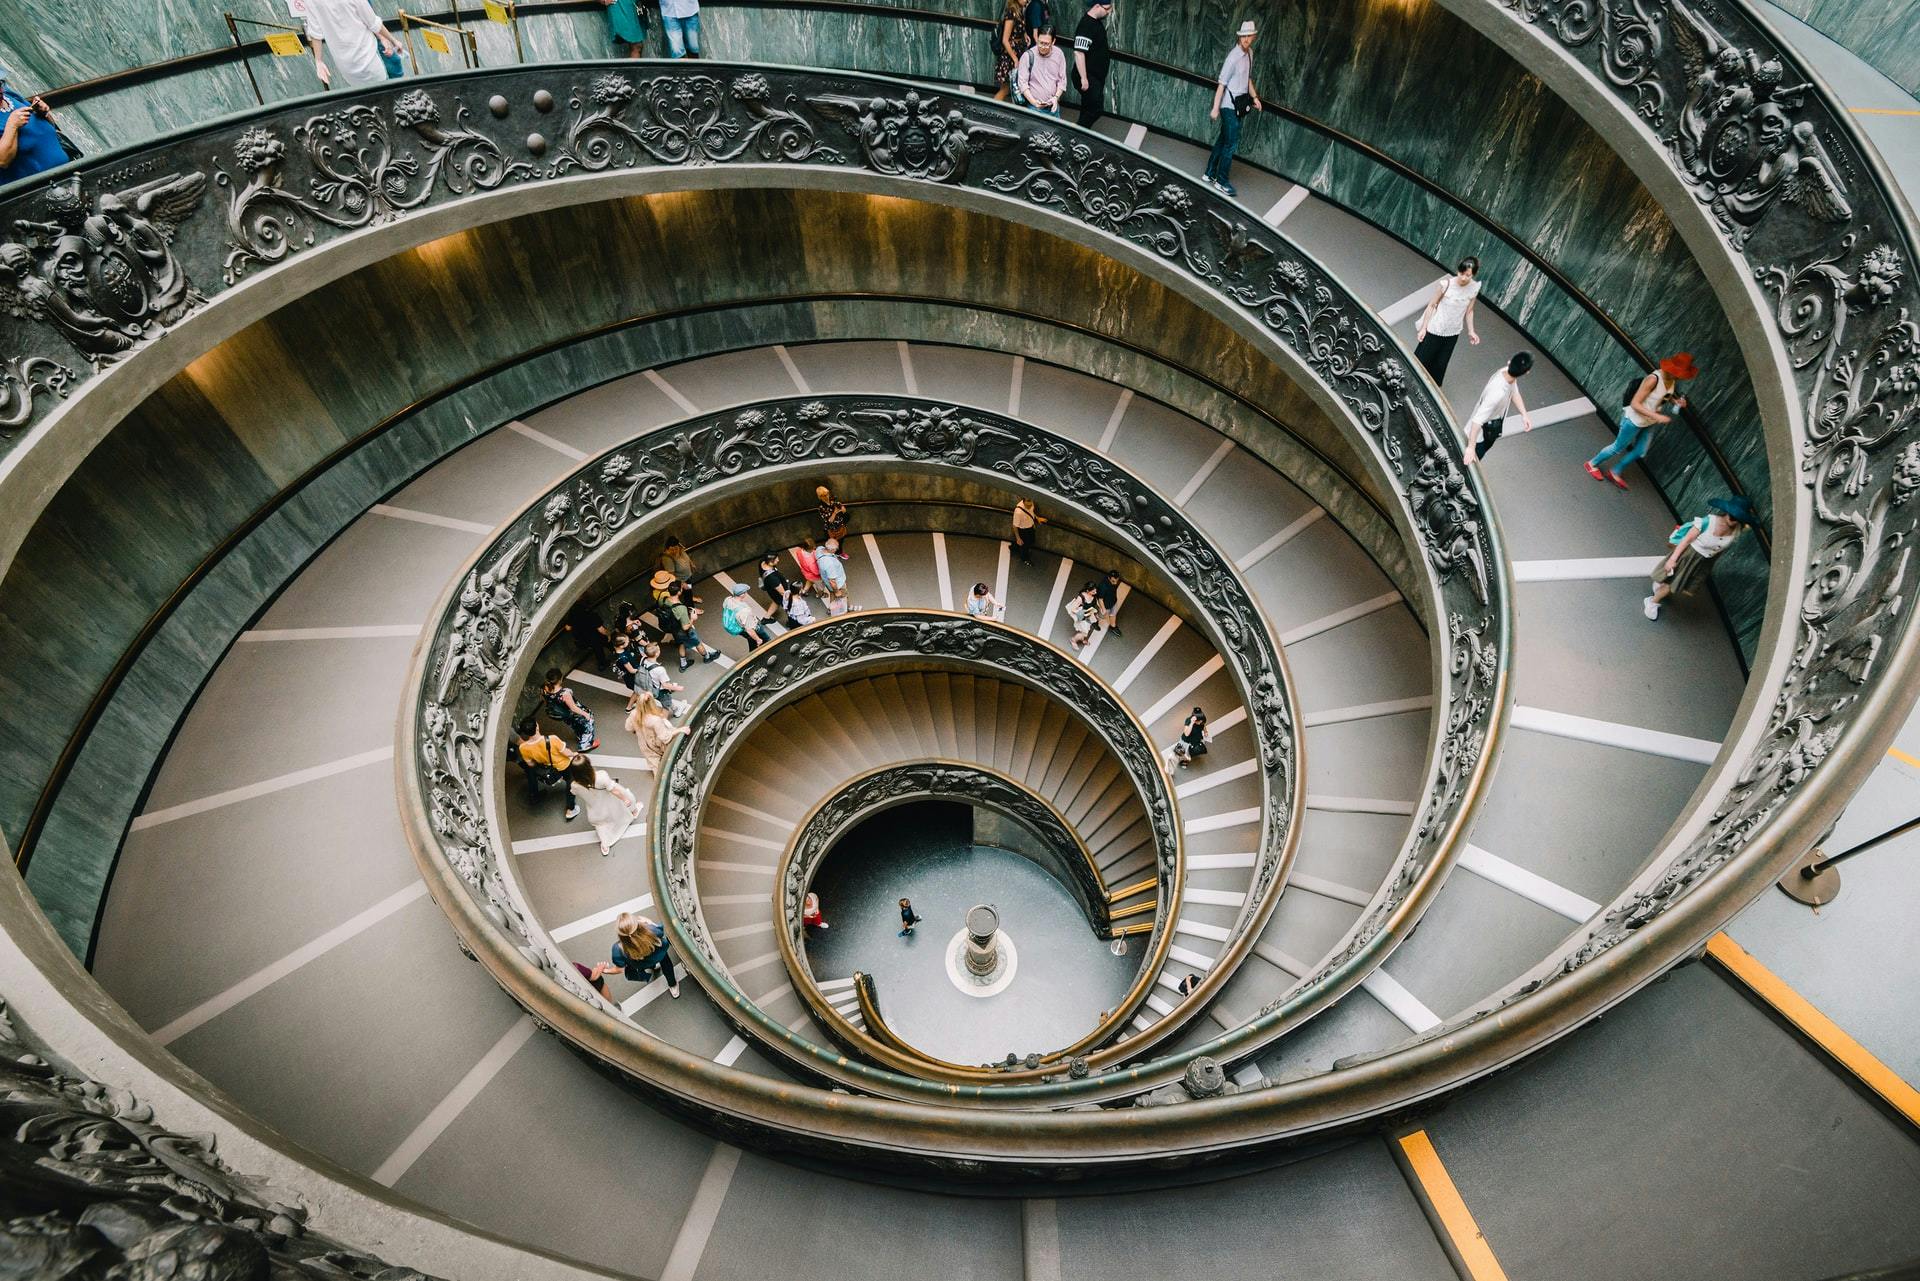 A photo of a staircase from above with people walking on it